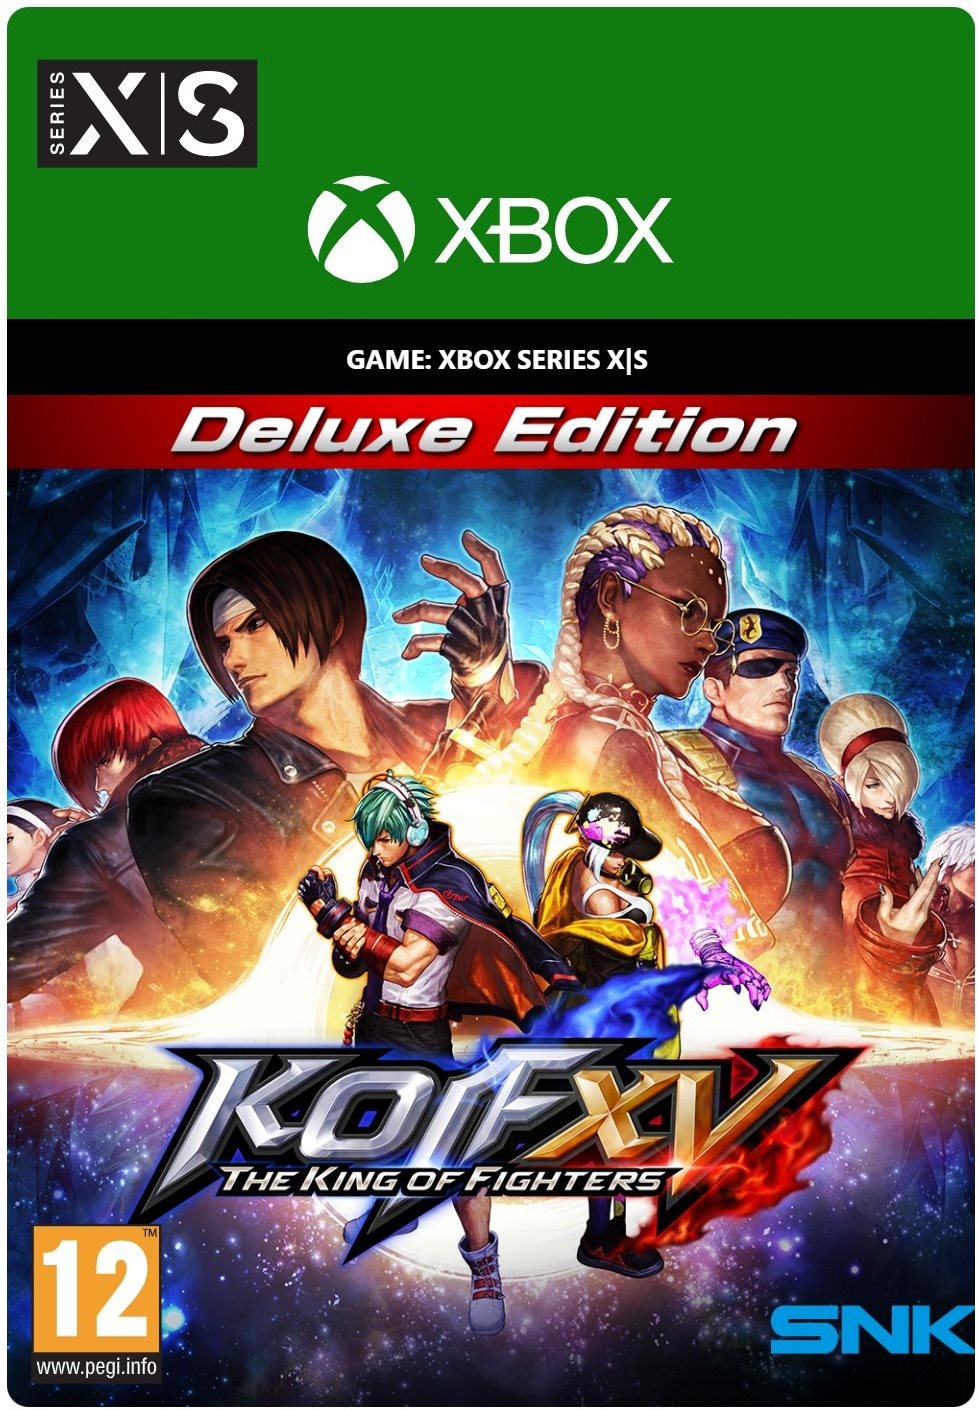 THE KING OF FIGHTERS XV Deluxe Edition - Xbox Series DIGITAL